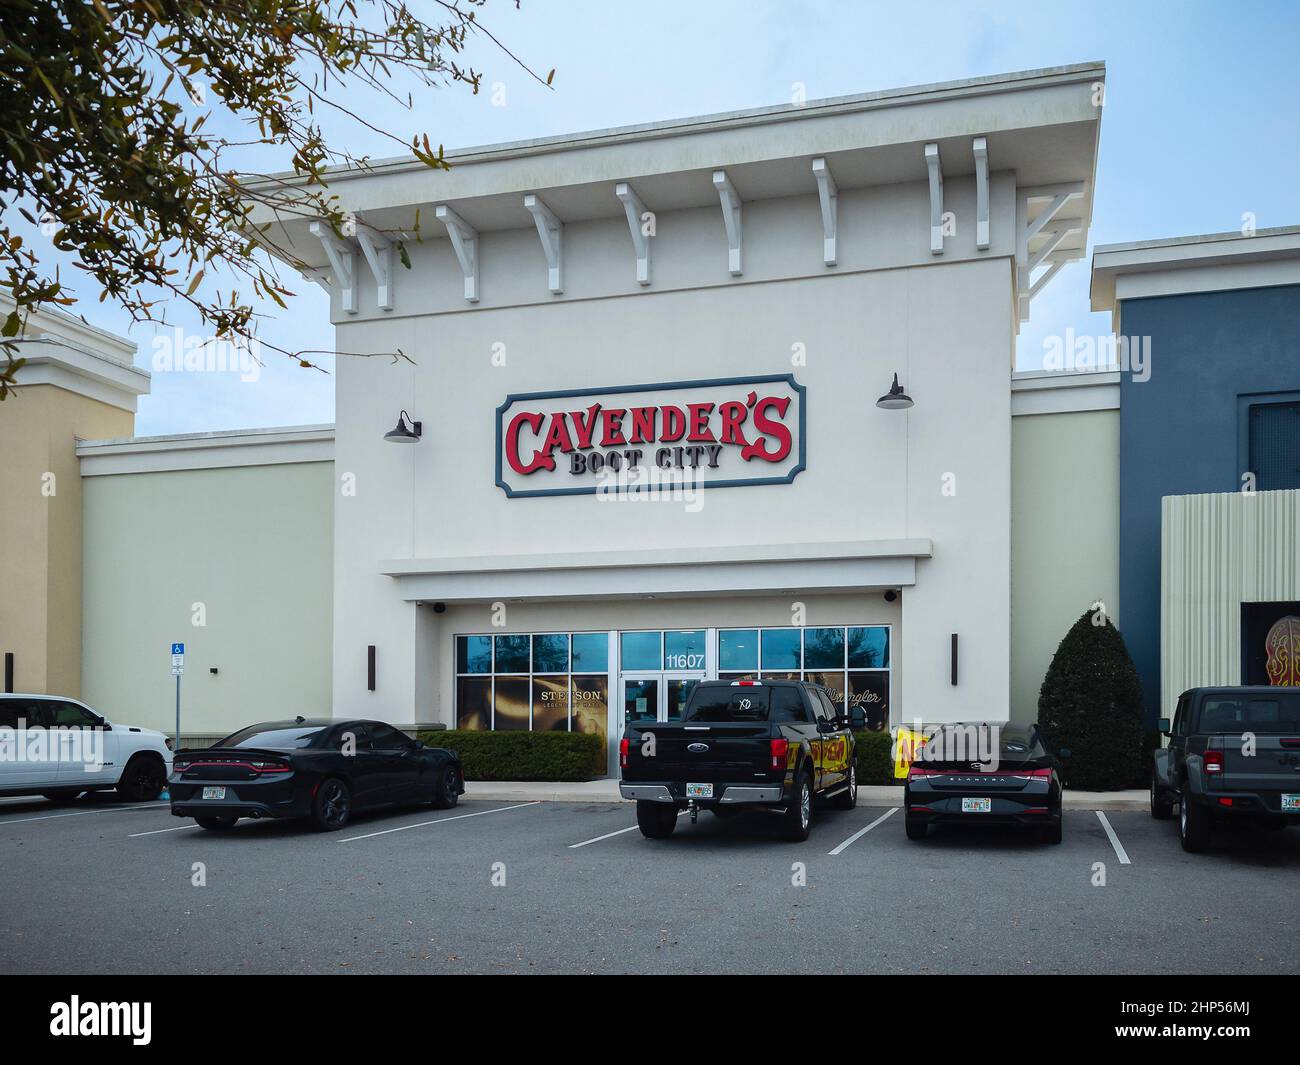 Orlando, Florida - February 5, 2022: Wide View of Cavender's Boot City Building Exterior and Parking Lot. Cavender's Western Wear Chain Store Founded Stock Photo